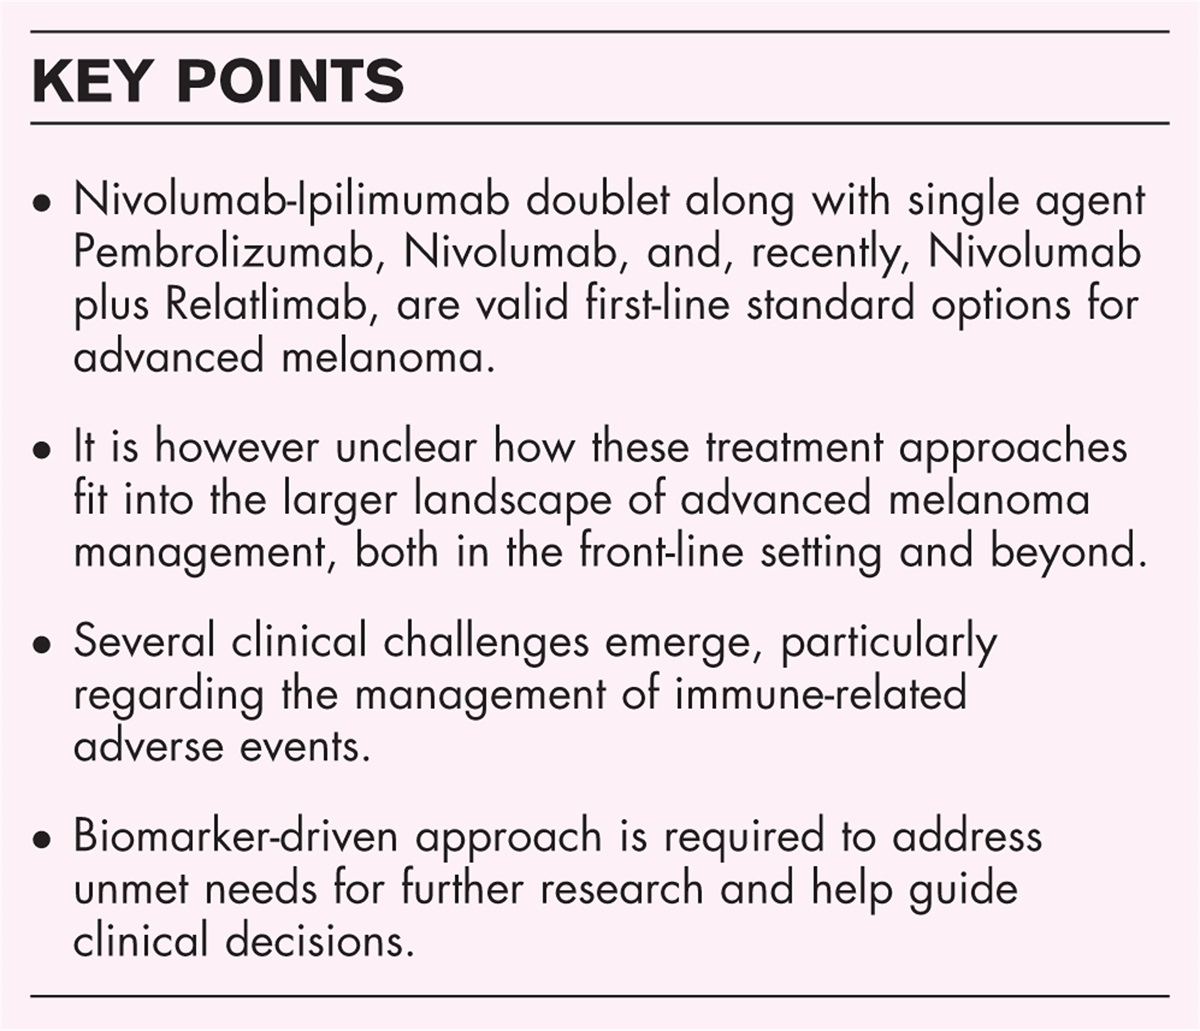 Single agent vs combination immunotherapy in advanced melanoma: a review of the evidence